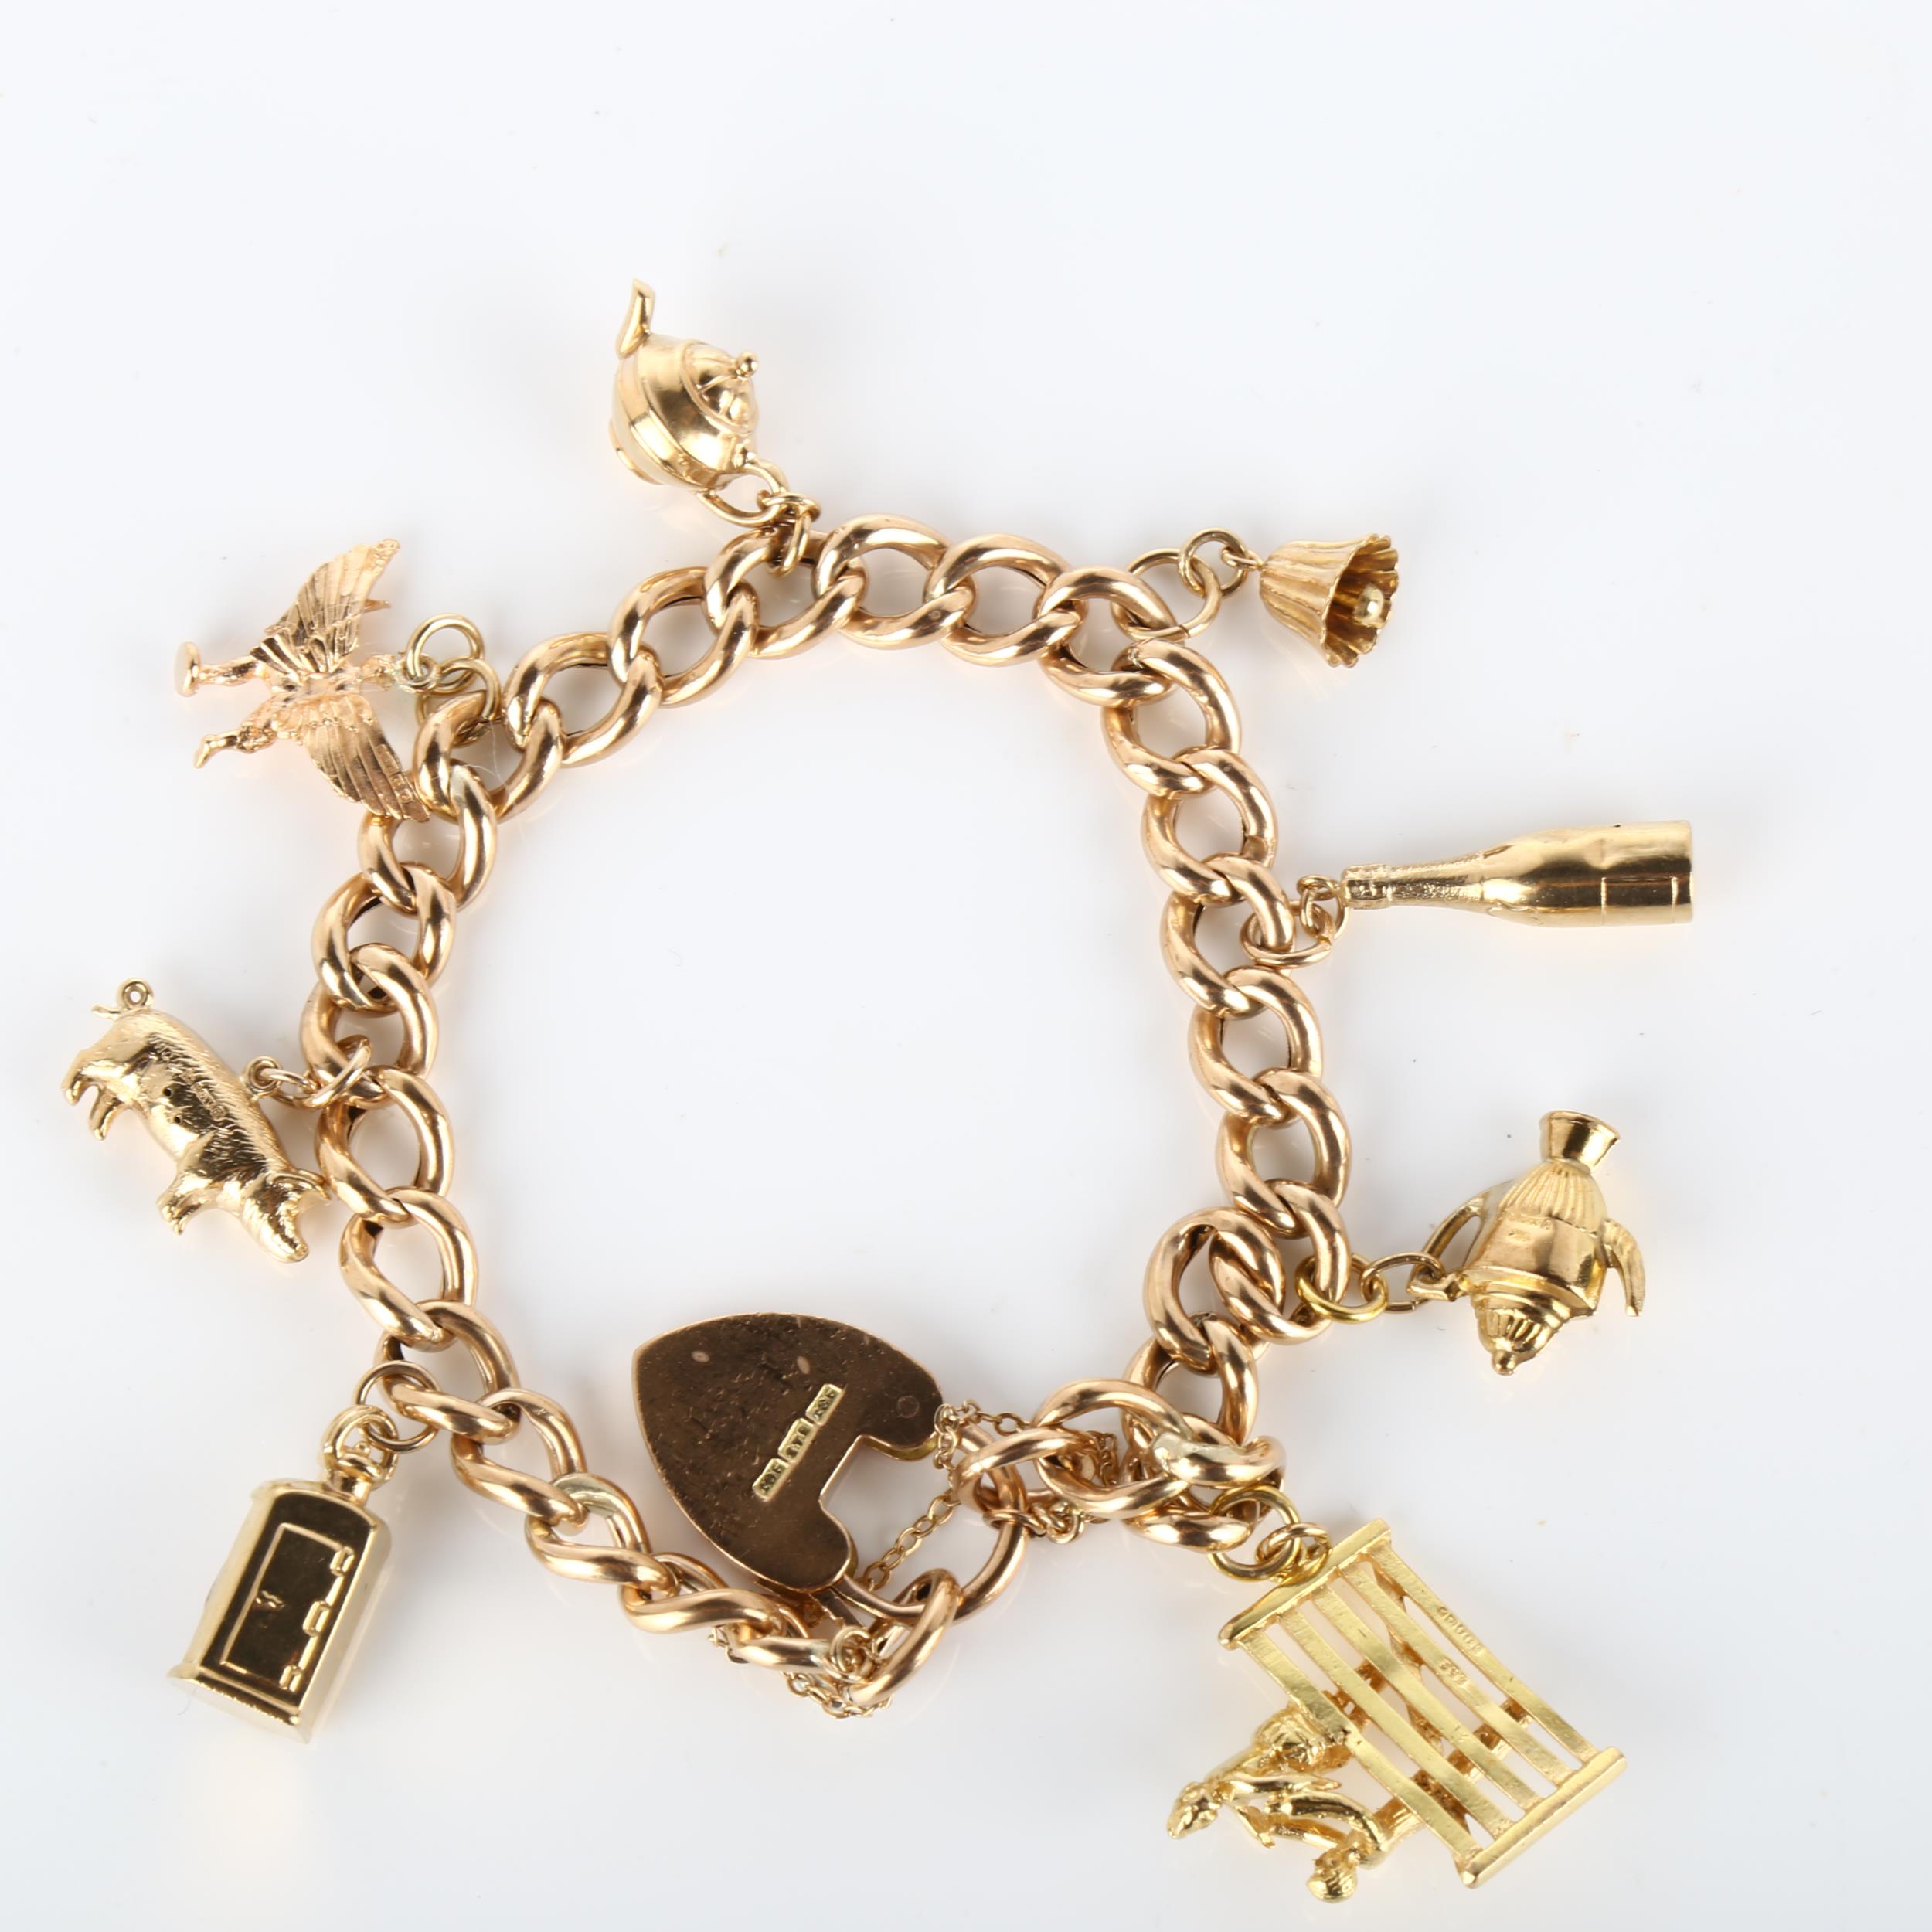 A mid-20th century 9ct gold hollow curb link charm bracelet, with 8 gold charms and heart padlock - Image 4 of 4